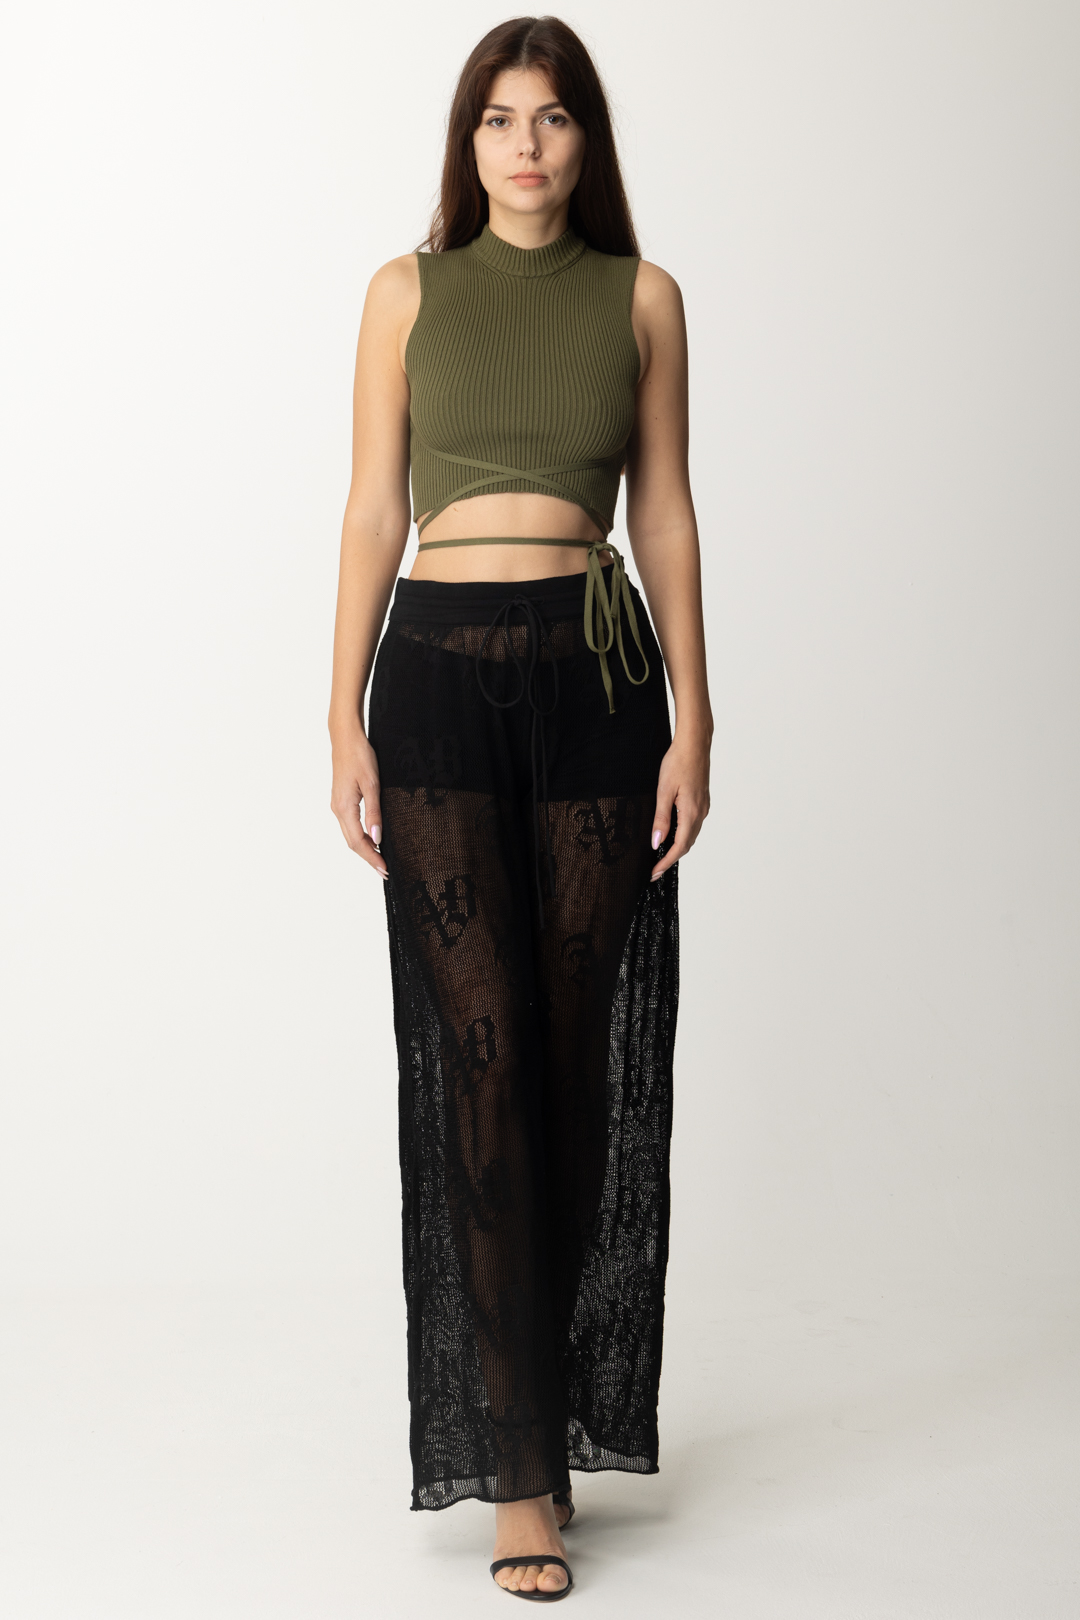 Preview: Aniye By Gothic mesh trousers Black